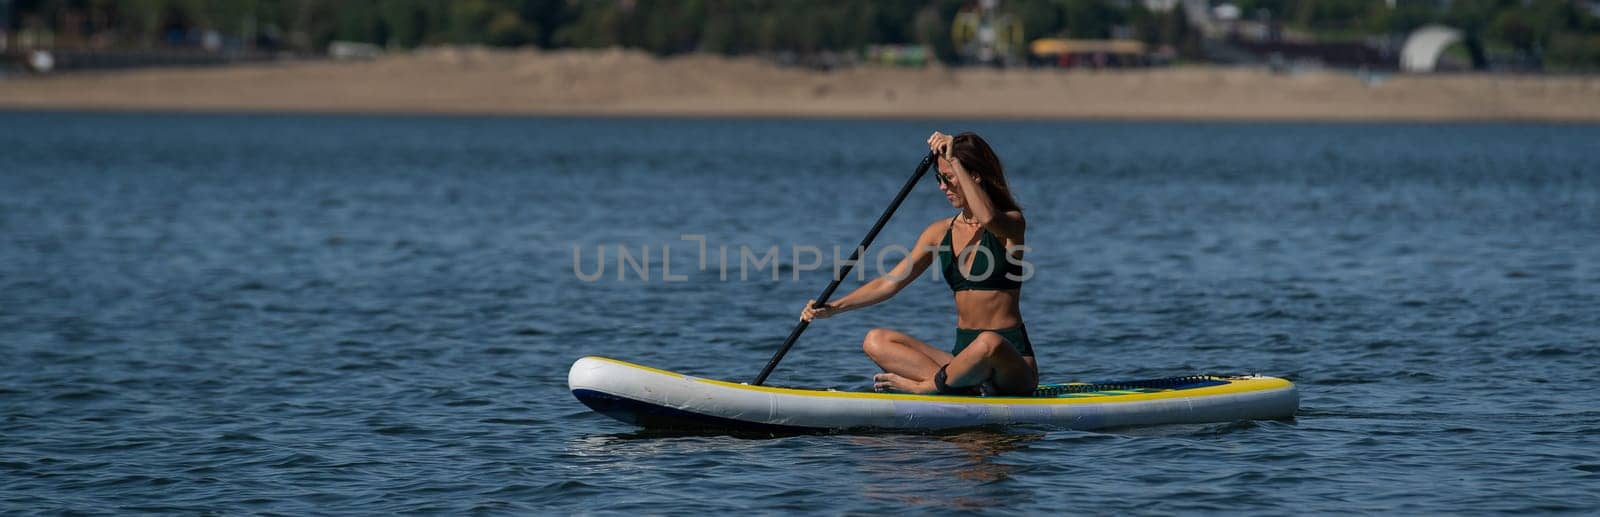 Caucasian woman is riding a SUP board on the river in the city. Summer sport. by mrwed54